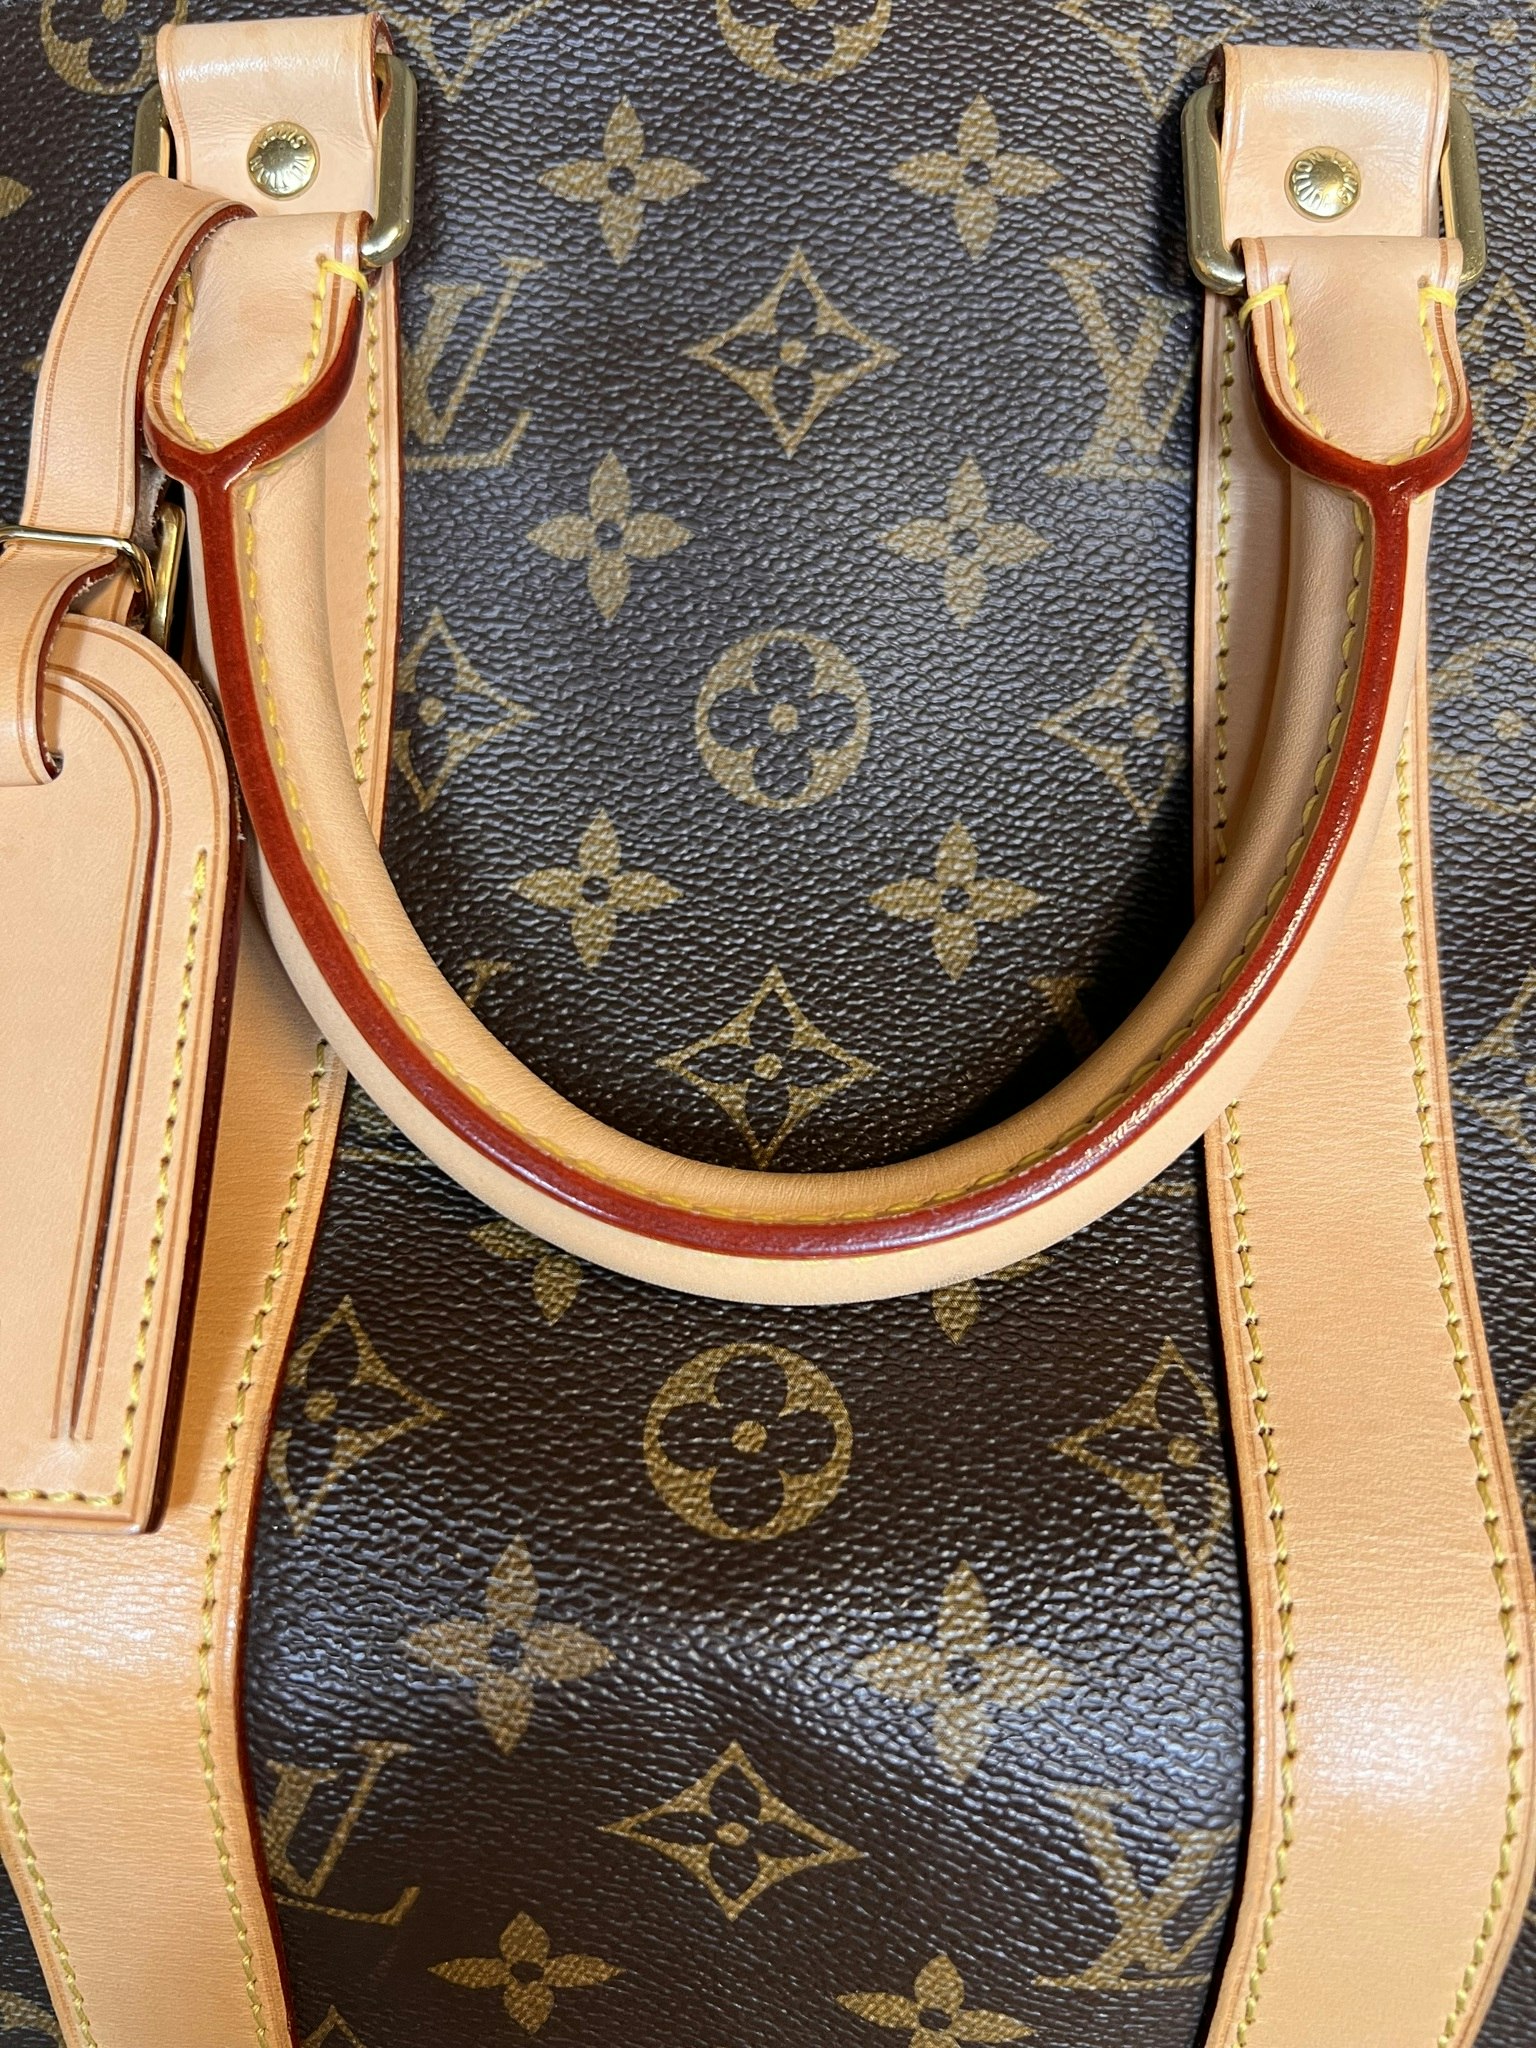 Louis Vuitton Pre-Owned Keepall 45 Bag Monogram at